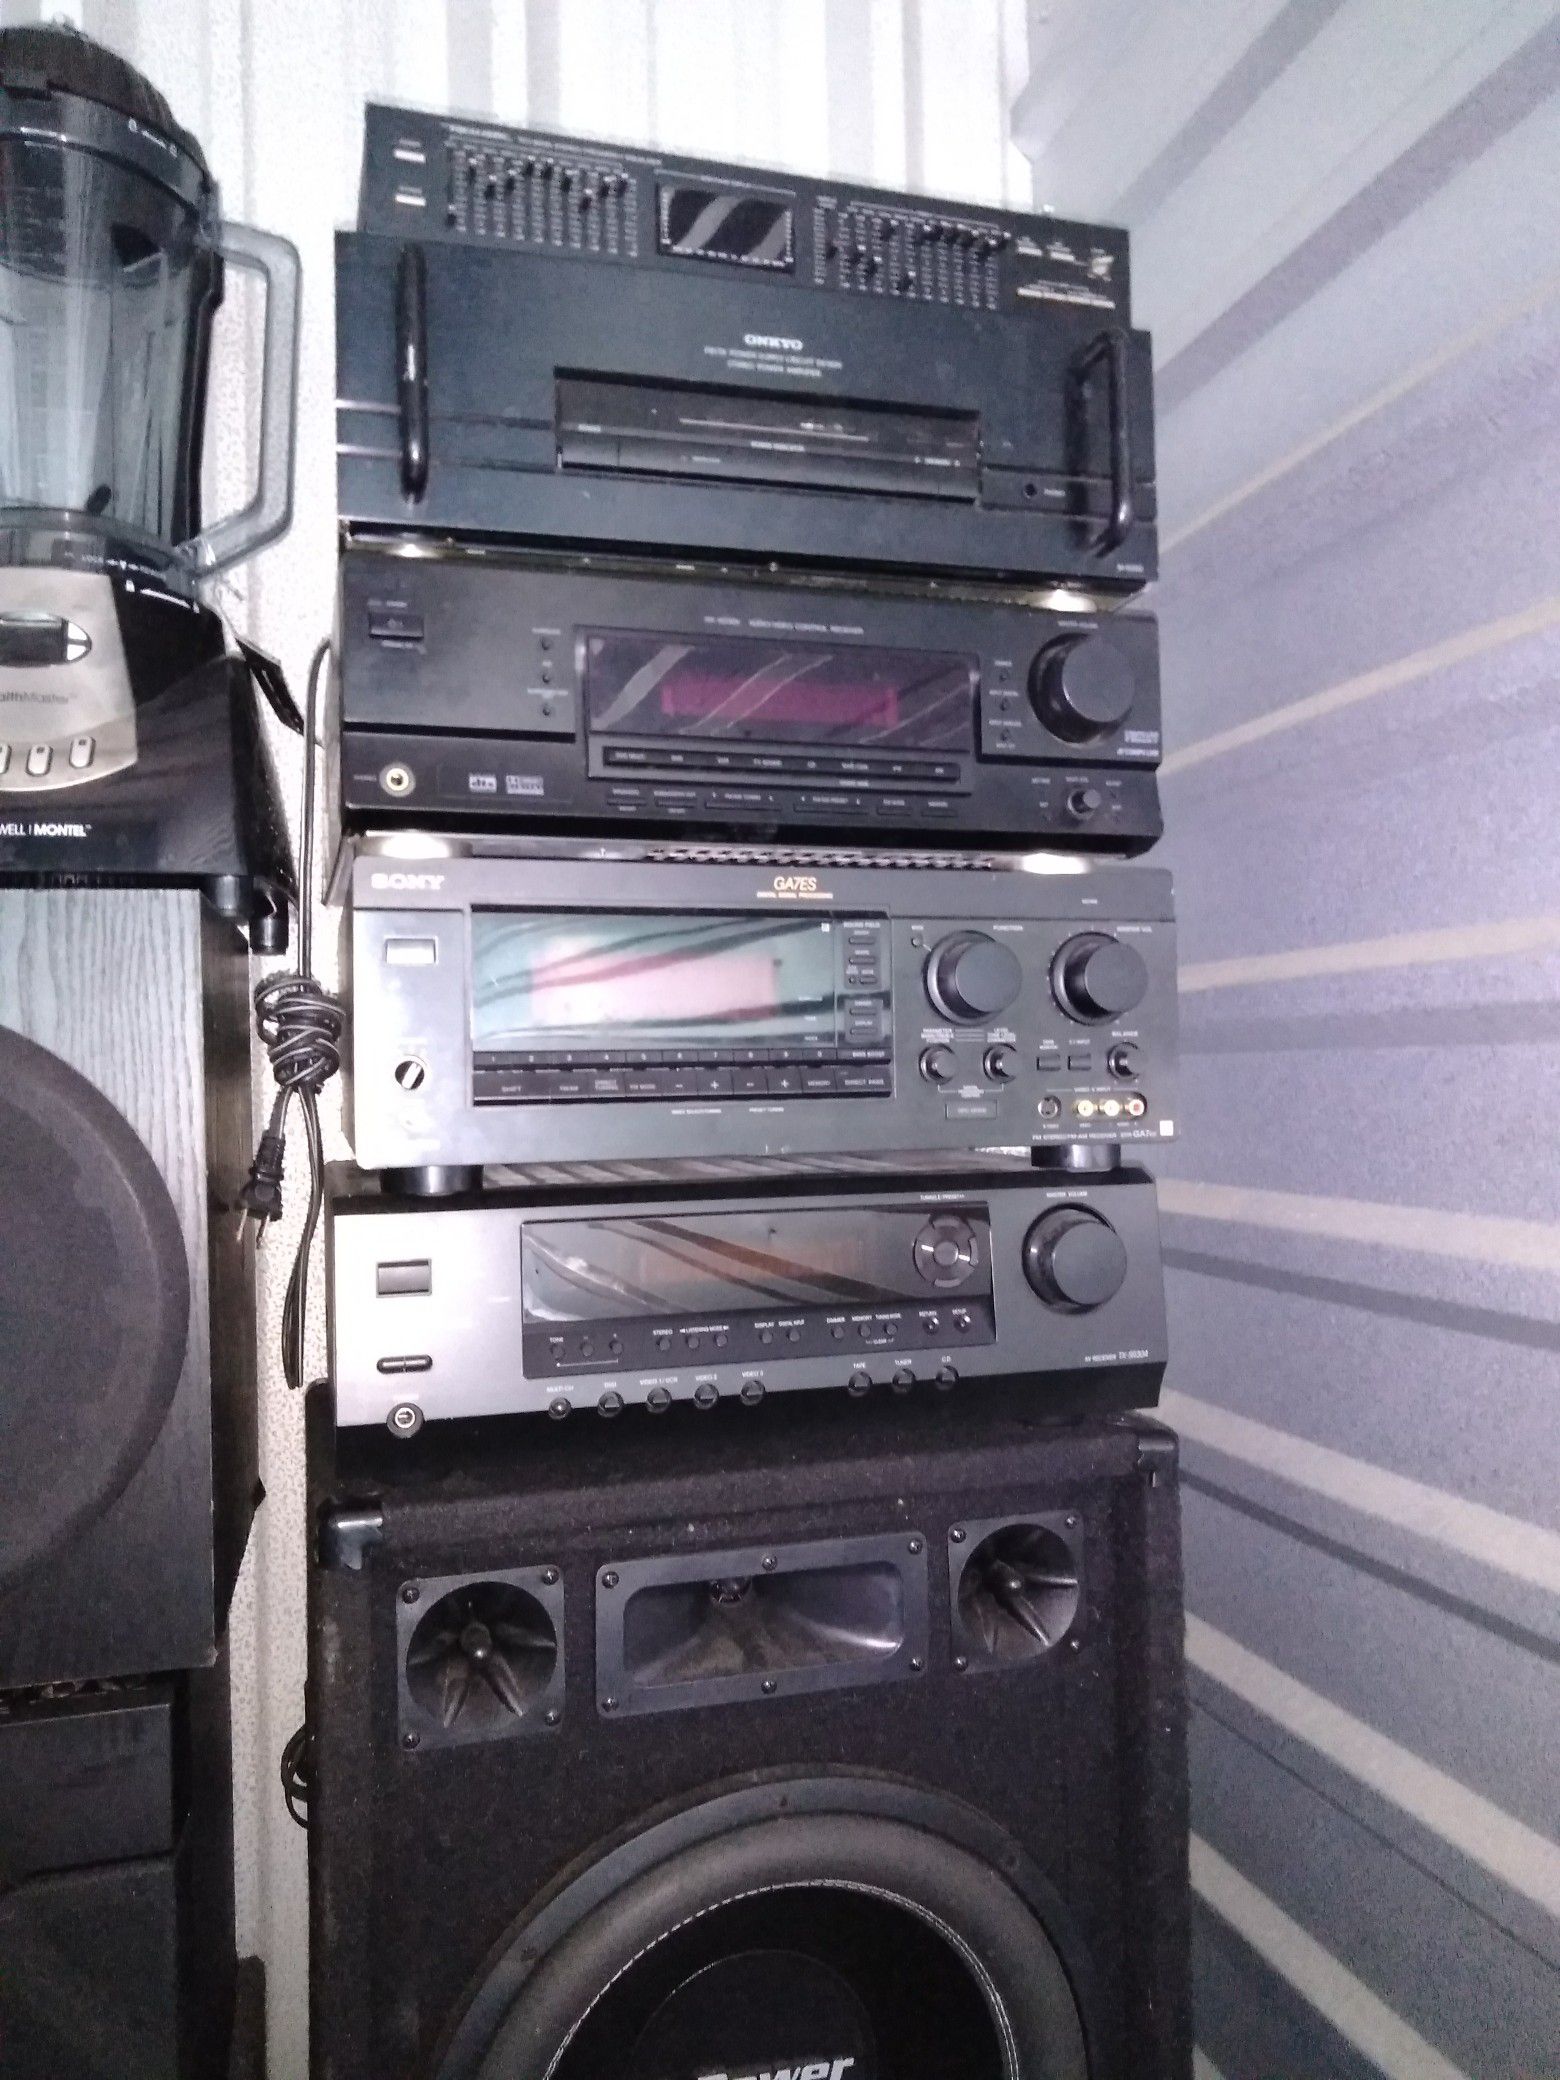 Take all for $125 3 stereo theater receivers, 1 amp and1 20 band equalizer